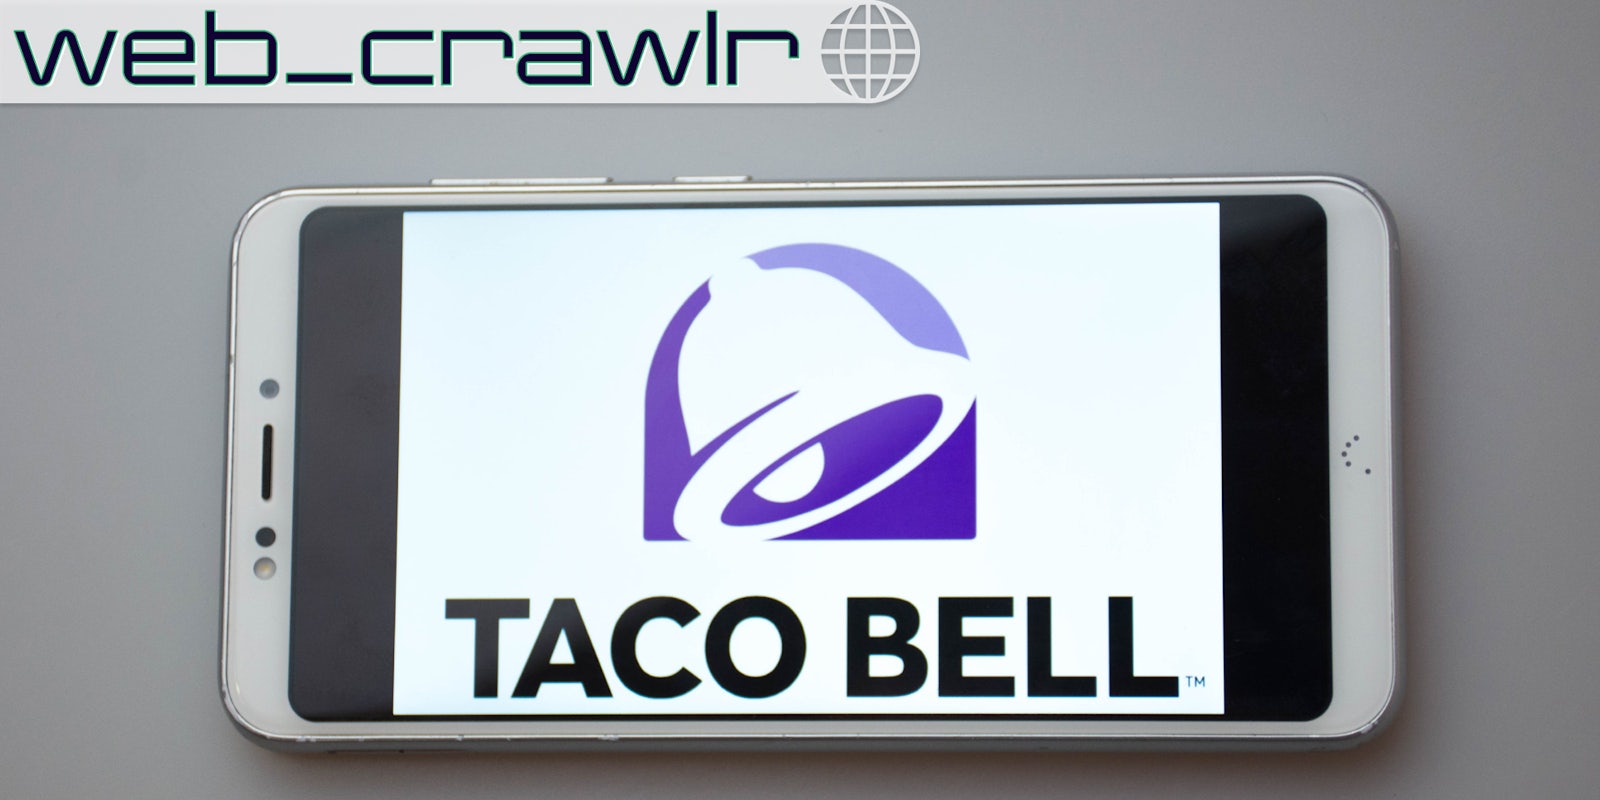 A phone showing the Taco Bell logo on it. The Daily Dot newsletter web_crawlr logo is in the top left corner.